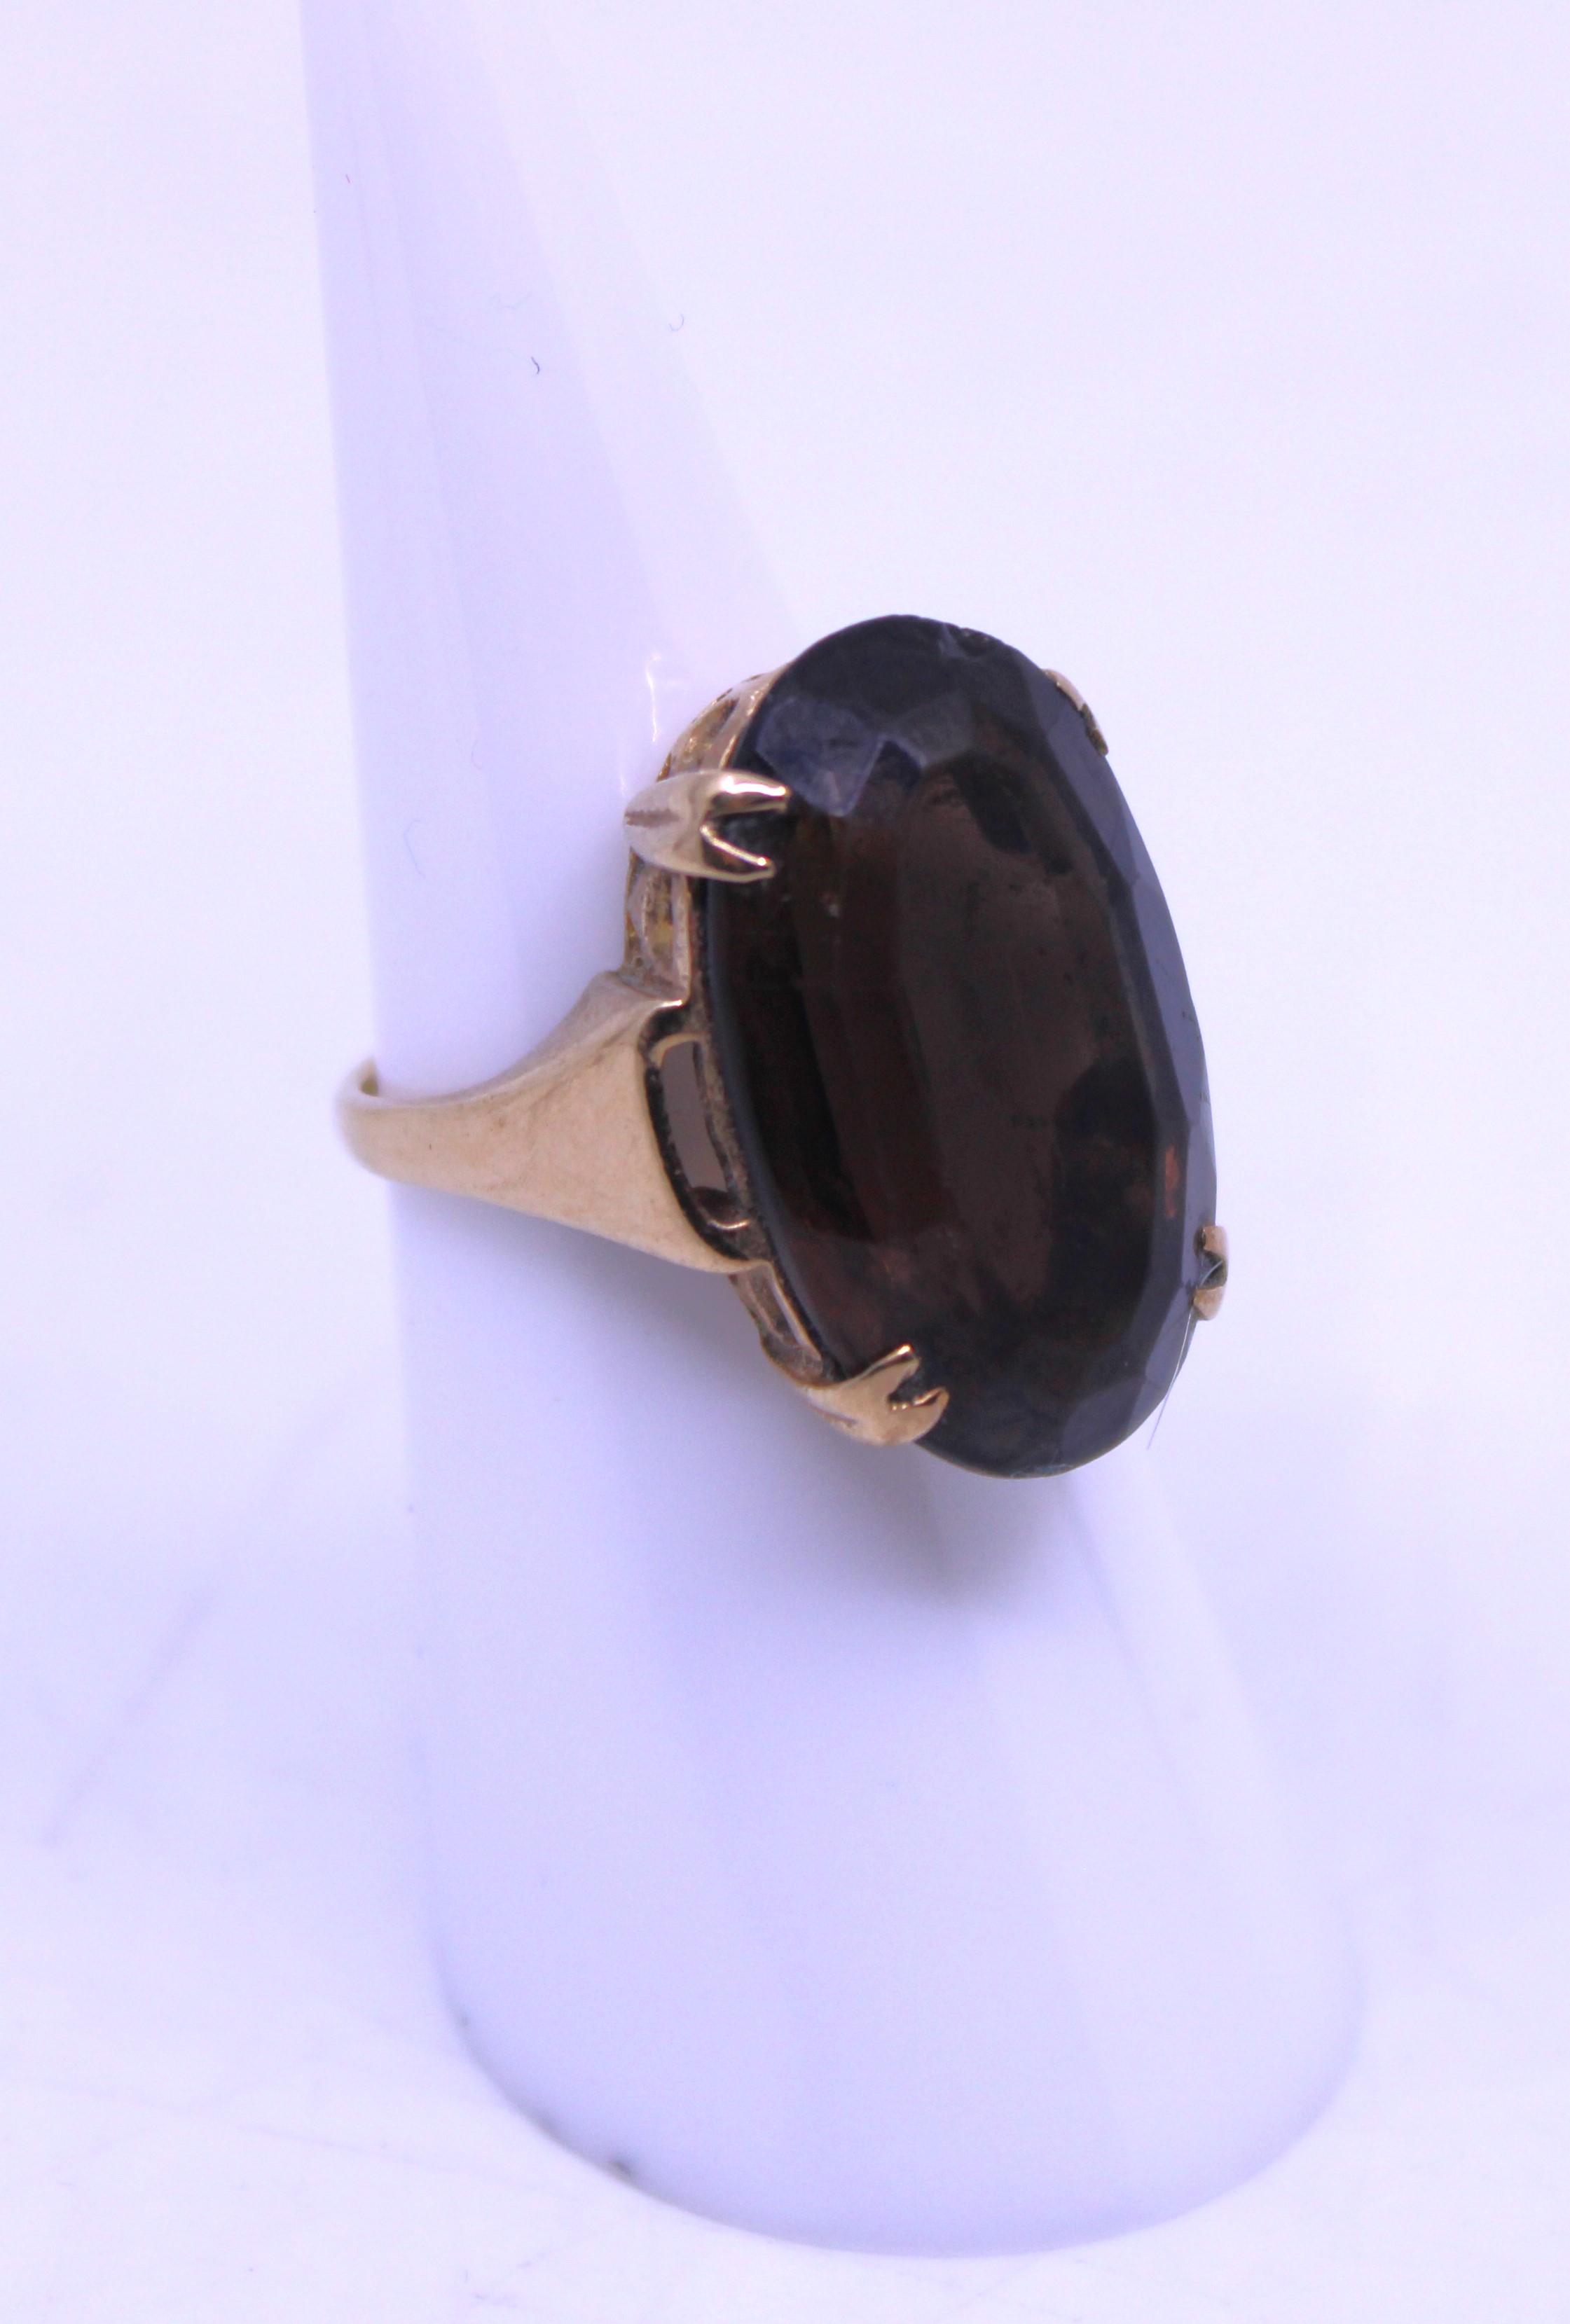 Unmarked Yellow Metal Oval Cut Brown Paste Stone Dress Ring. The Oval Cut Brown Paste Stone measures